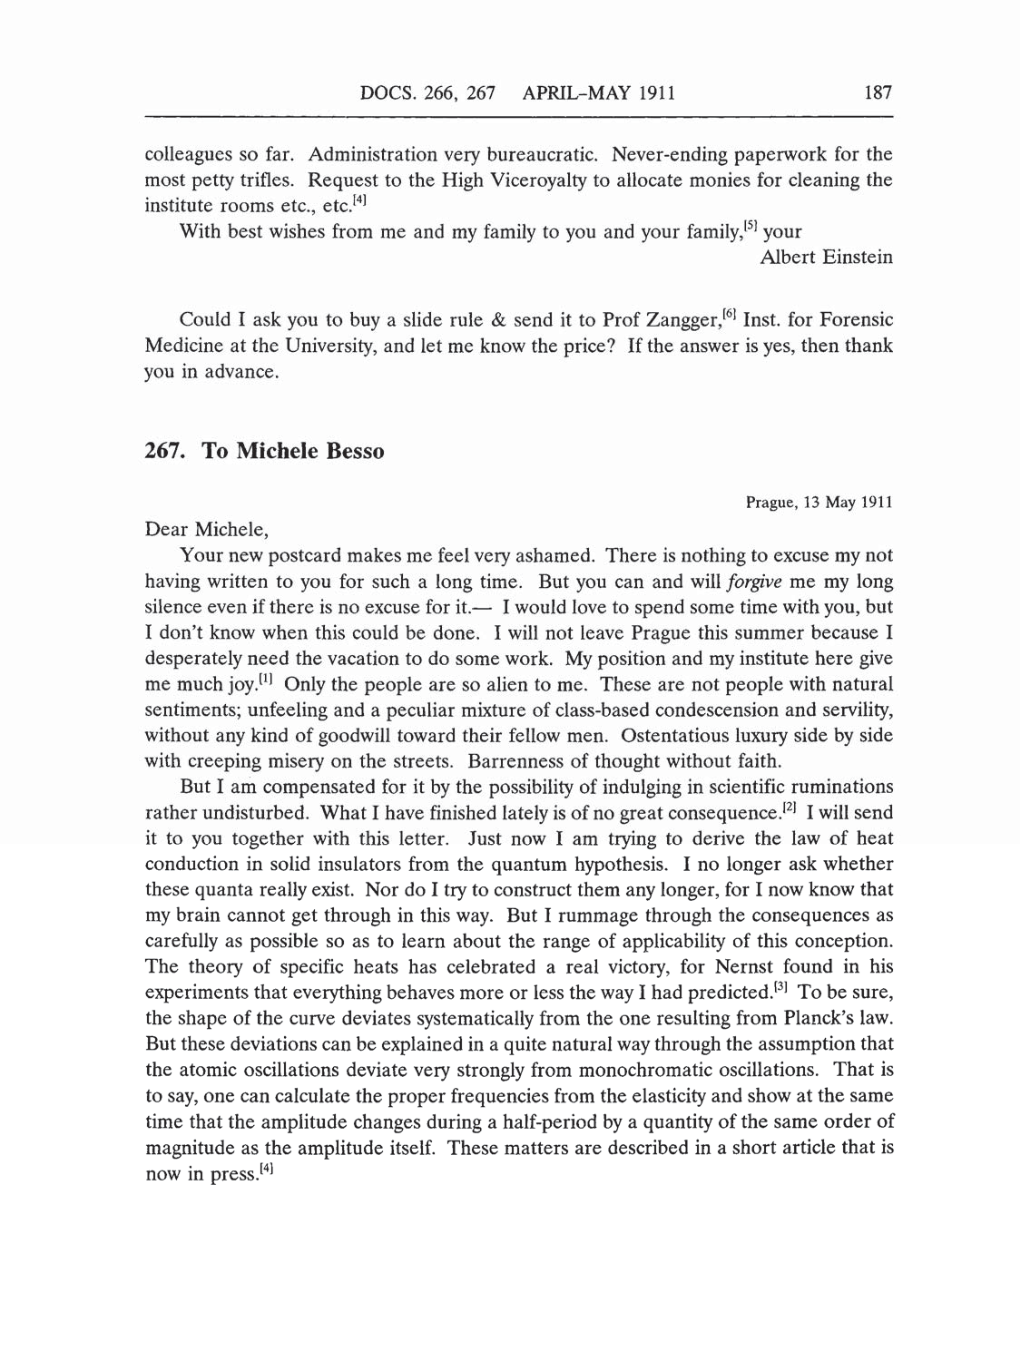 Volume 5: The Swiss Years: Correspondence, 1902-1914 (English translation supplement) page 187